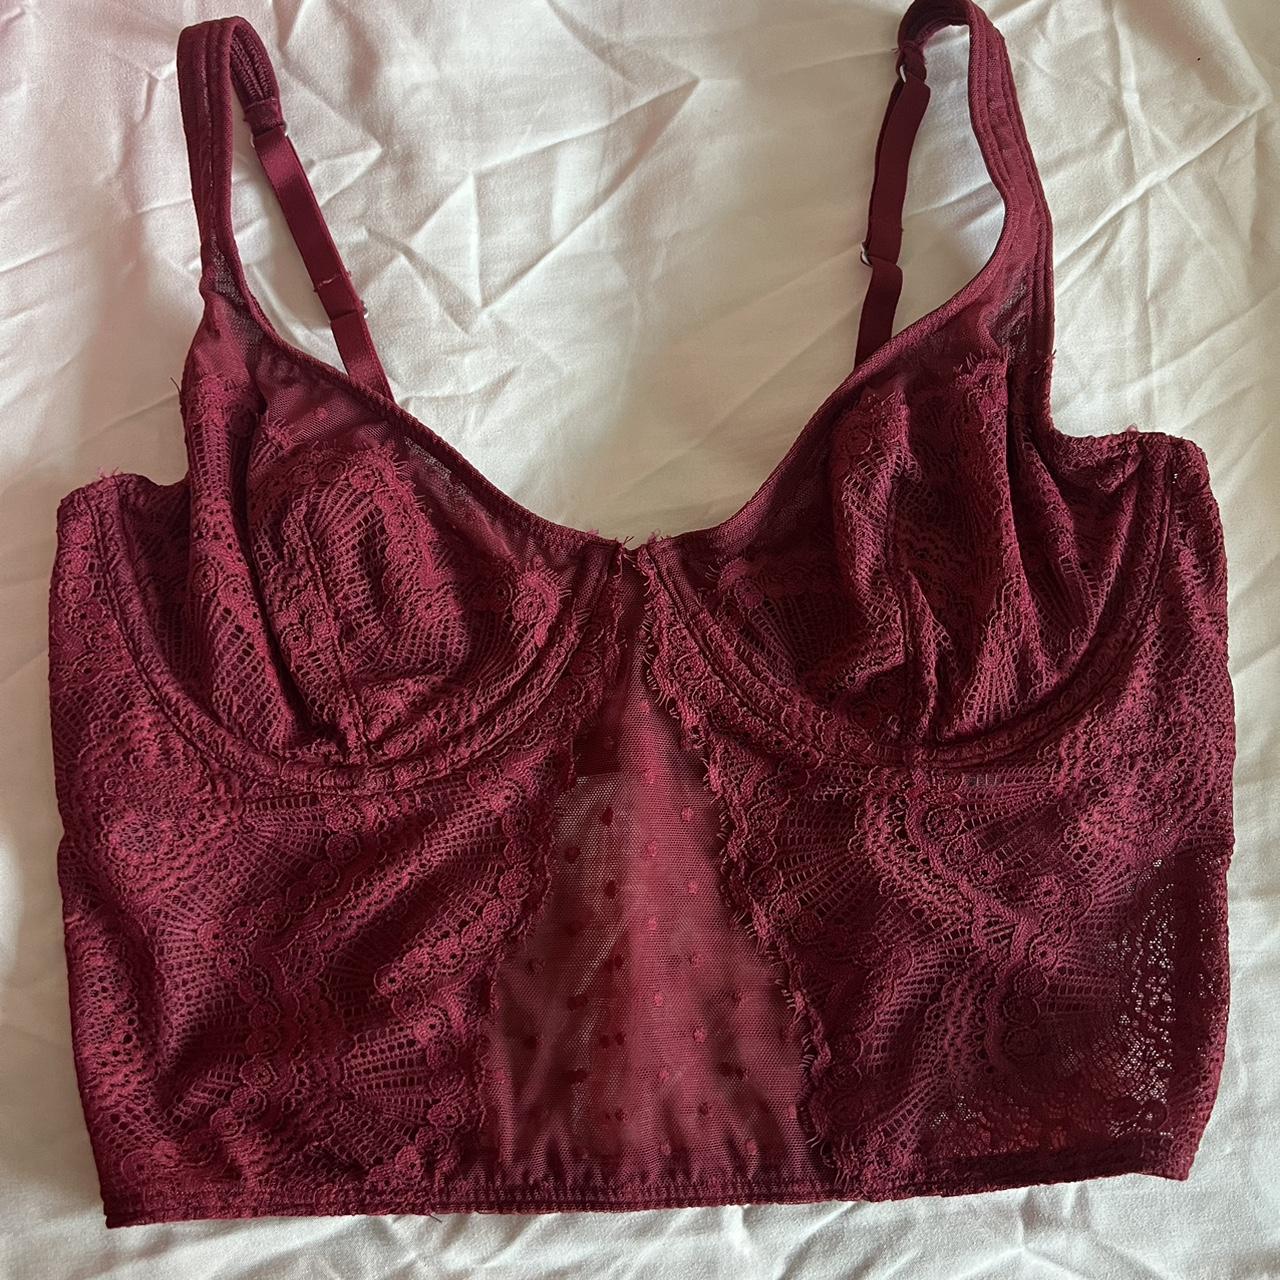 Gilly Hicks Bralette Red - $8 - From avery